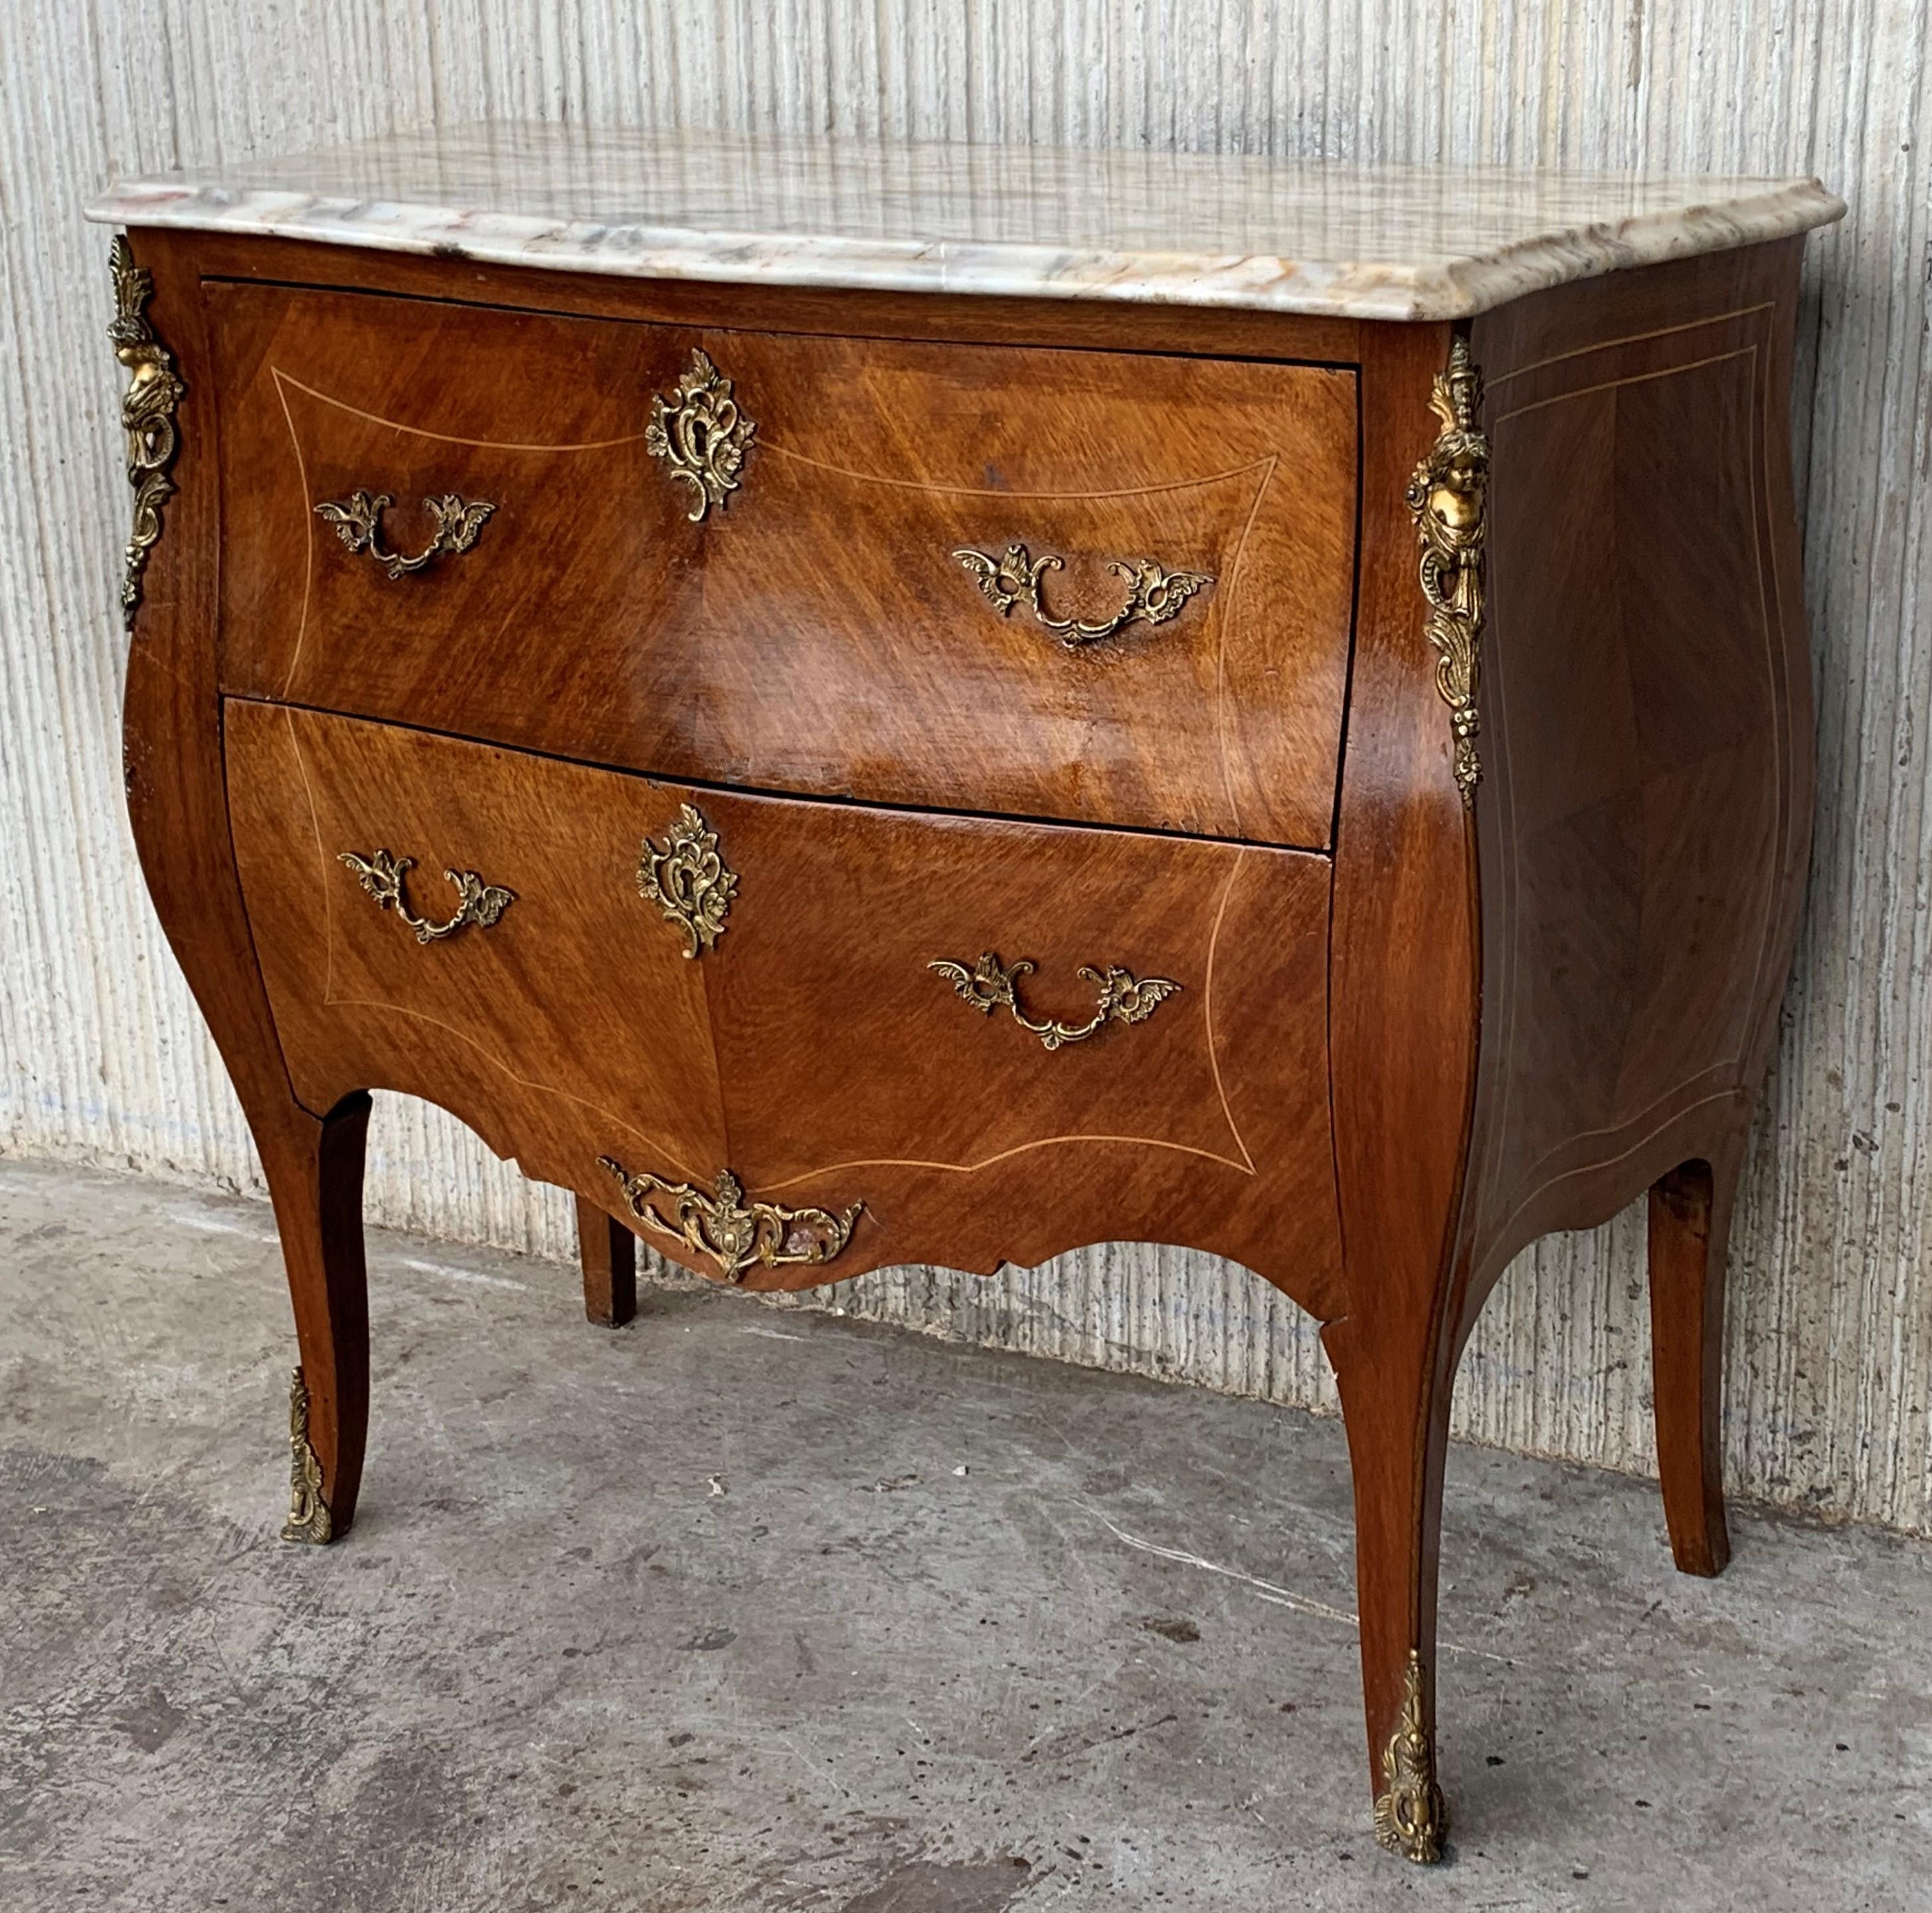 20th Century French Louis XV Marble-Top Bombe Chest or Commode with Two Drawers In Good Condition For Sale In Miami, FL